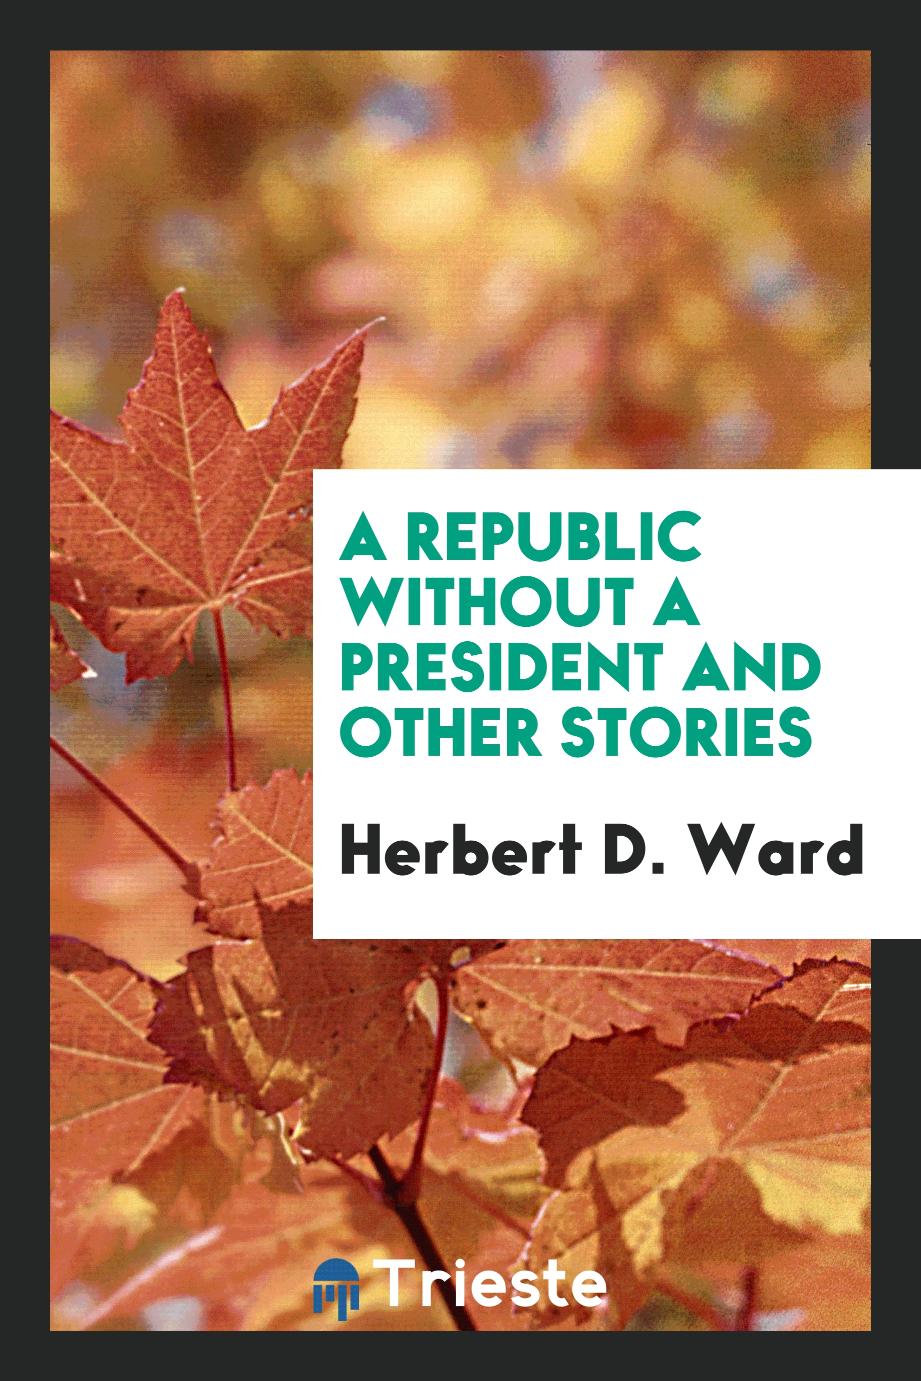 A republic without a president and other stories